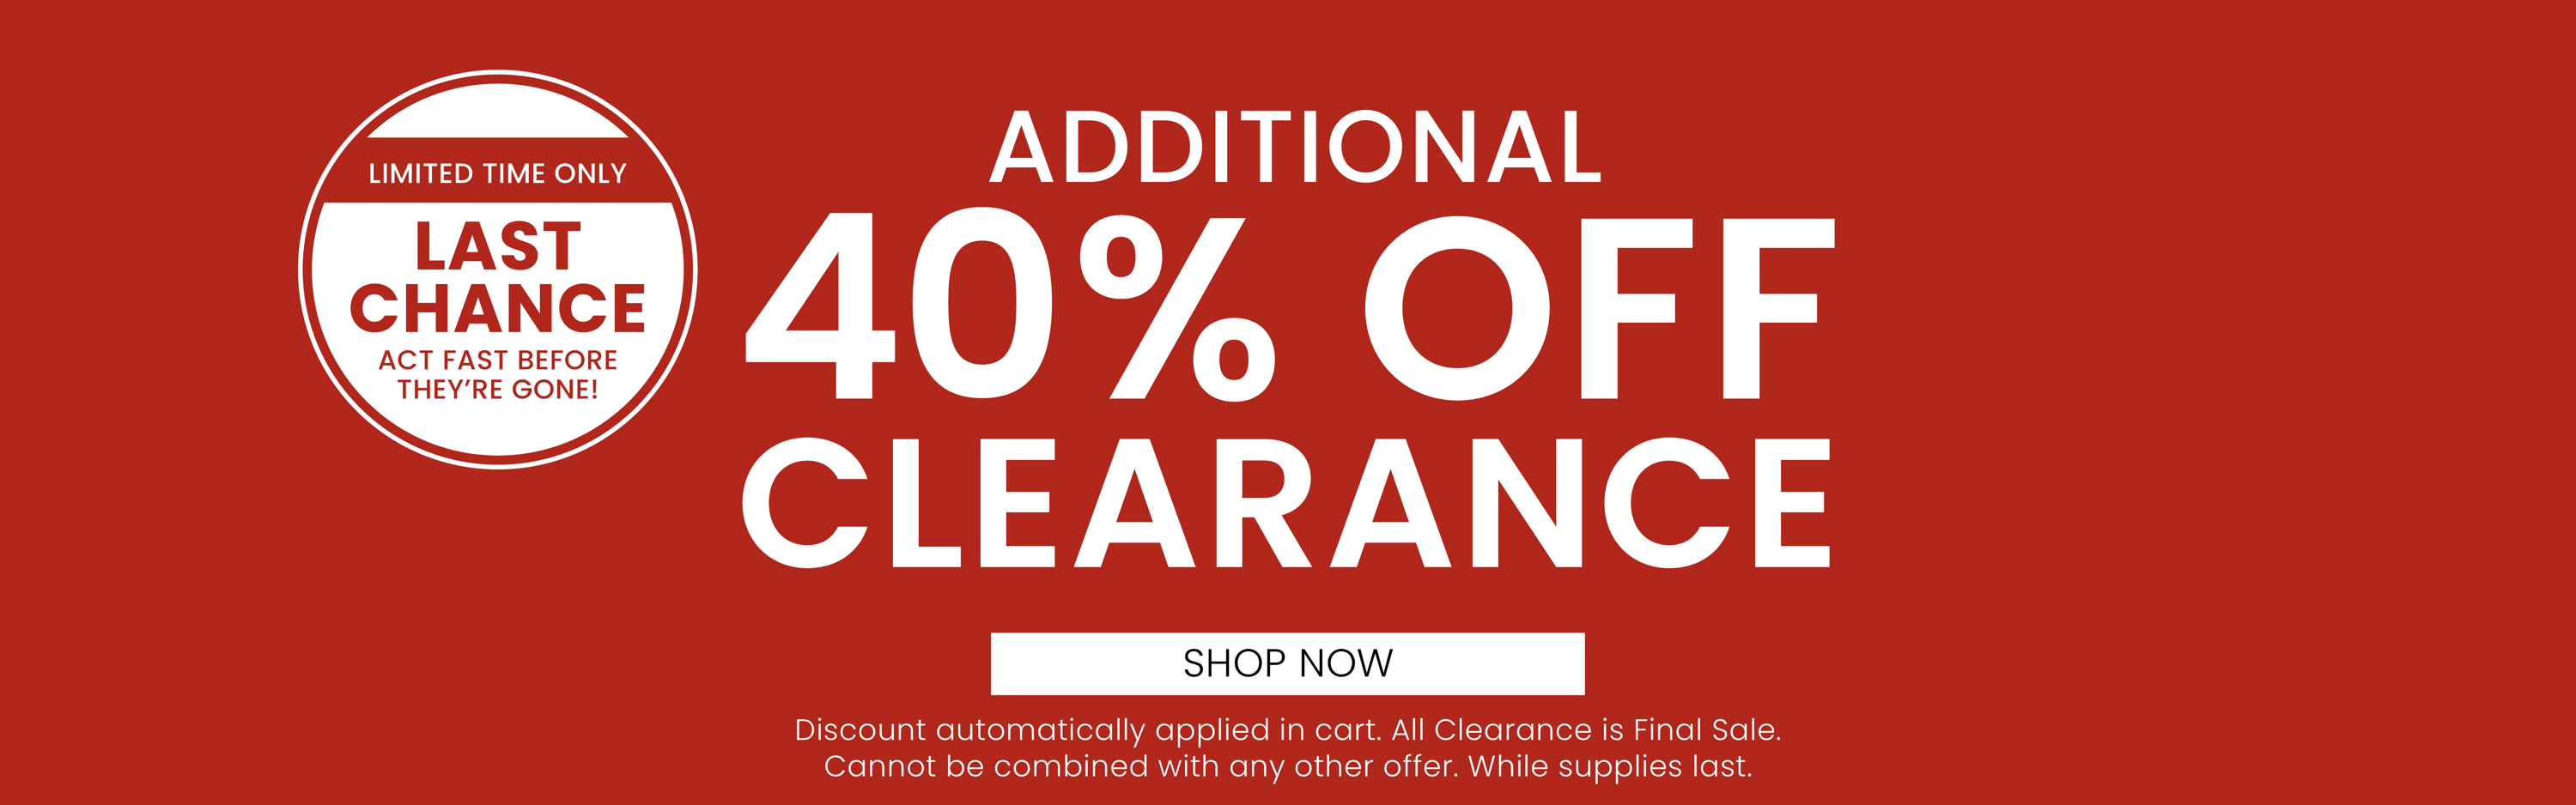 Last Chance! Additional 40% Off Clearance. 